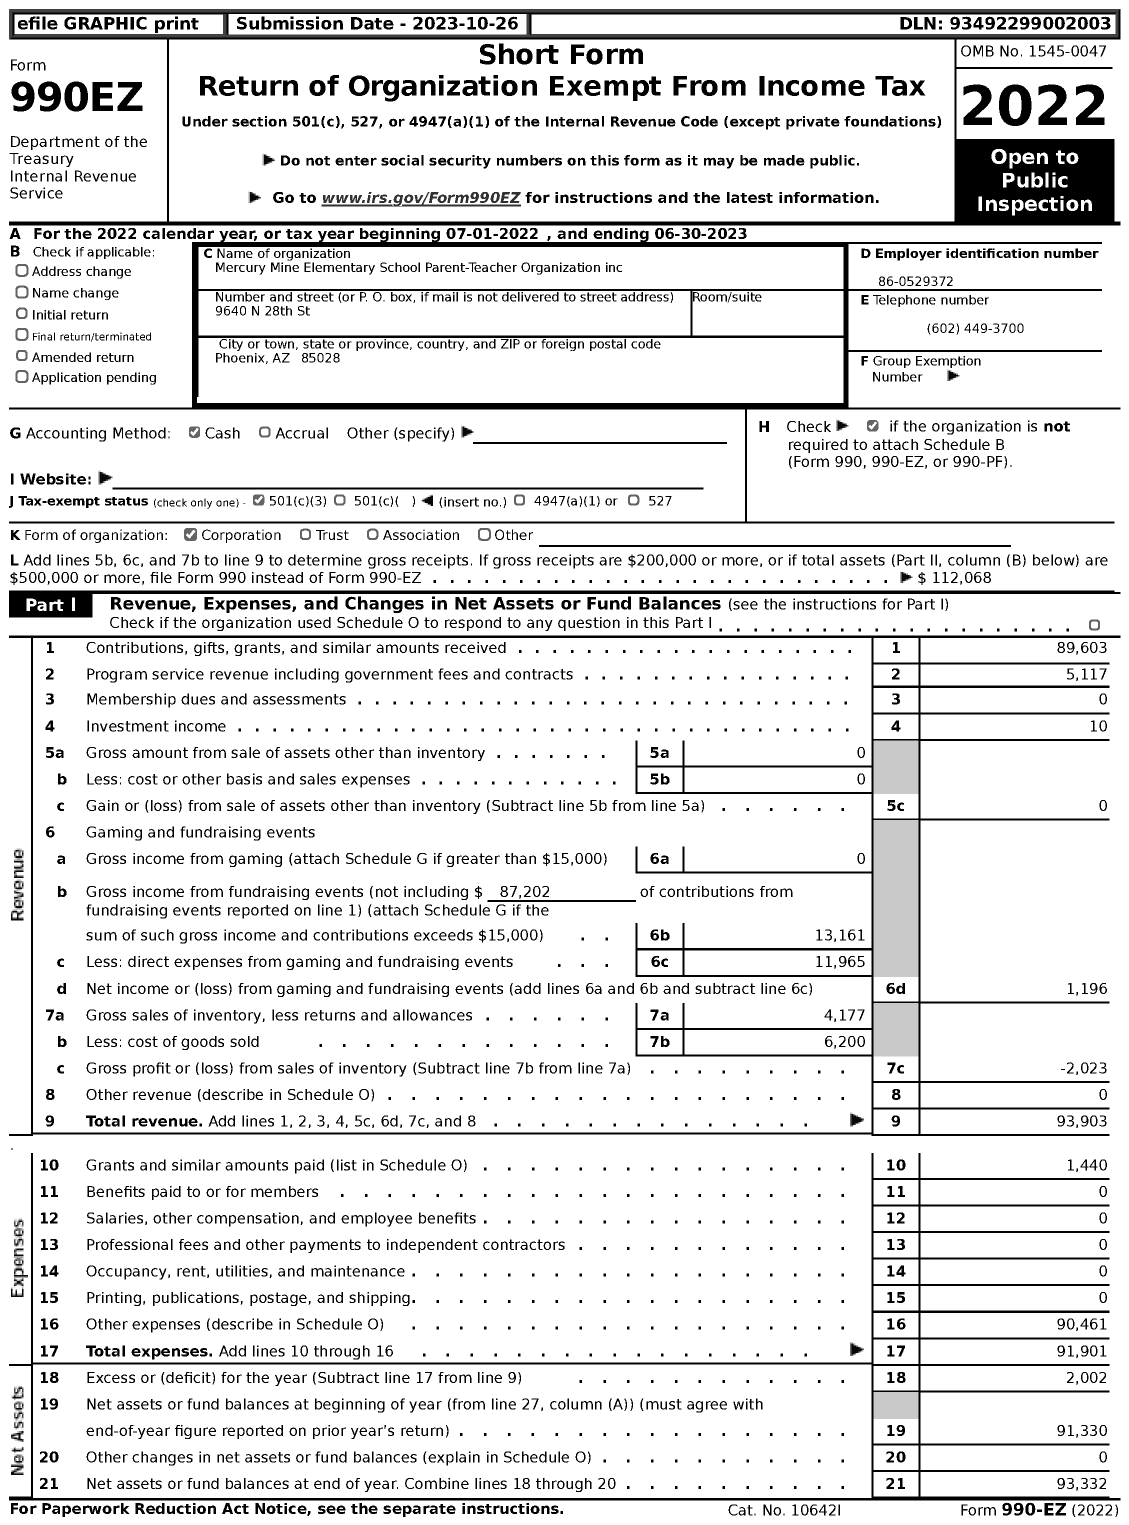 Image of first page of 2022 Form 990EZ for Mercury Mine Elementary School Parent-Teacher Organization